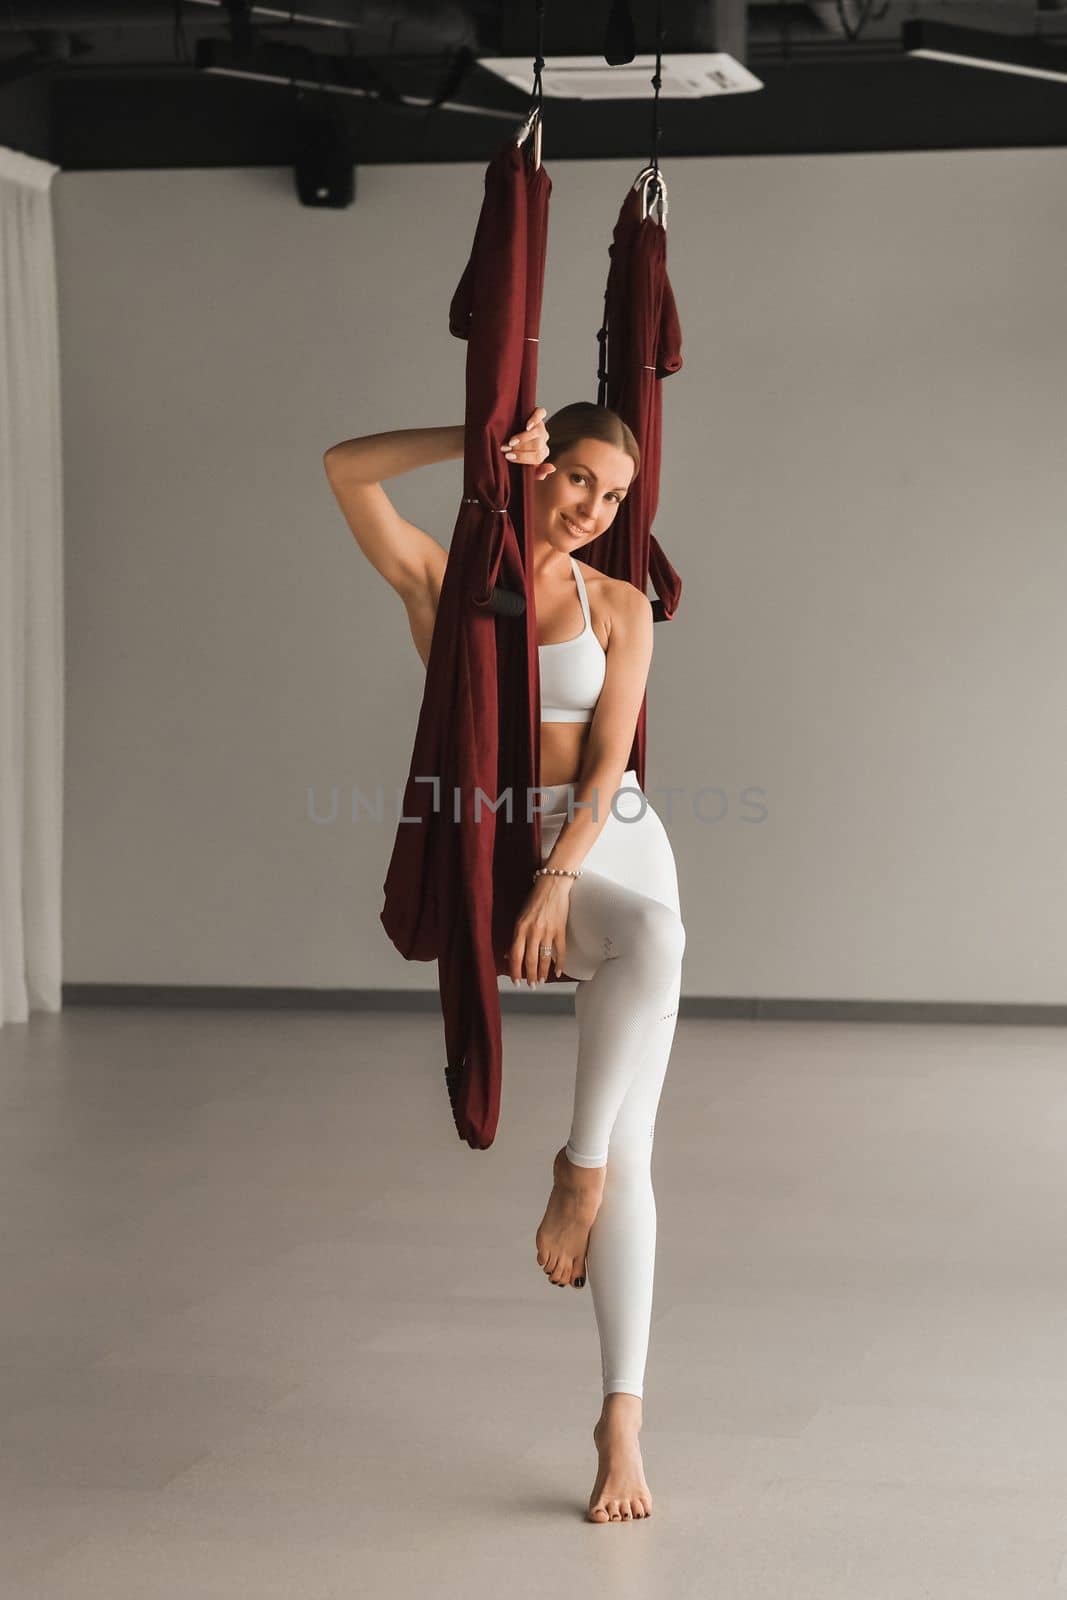 Portrait of a girl in white sportswear sitting in a hanging yoga hammock in the fitness room.